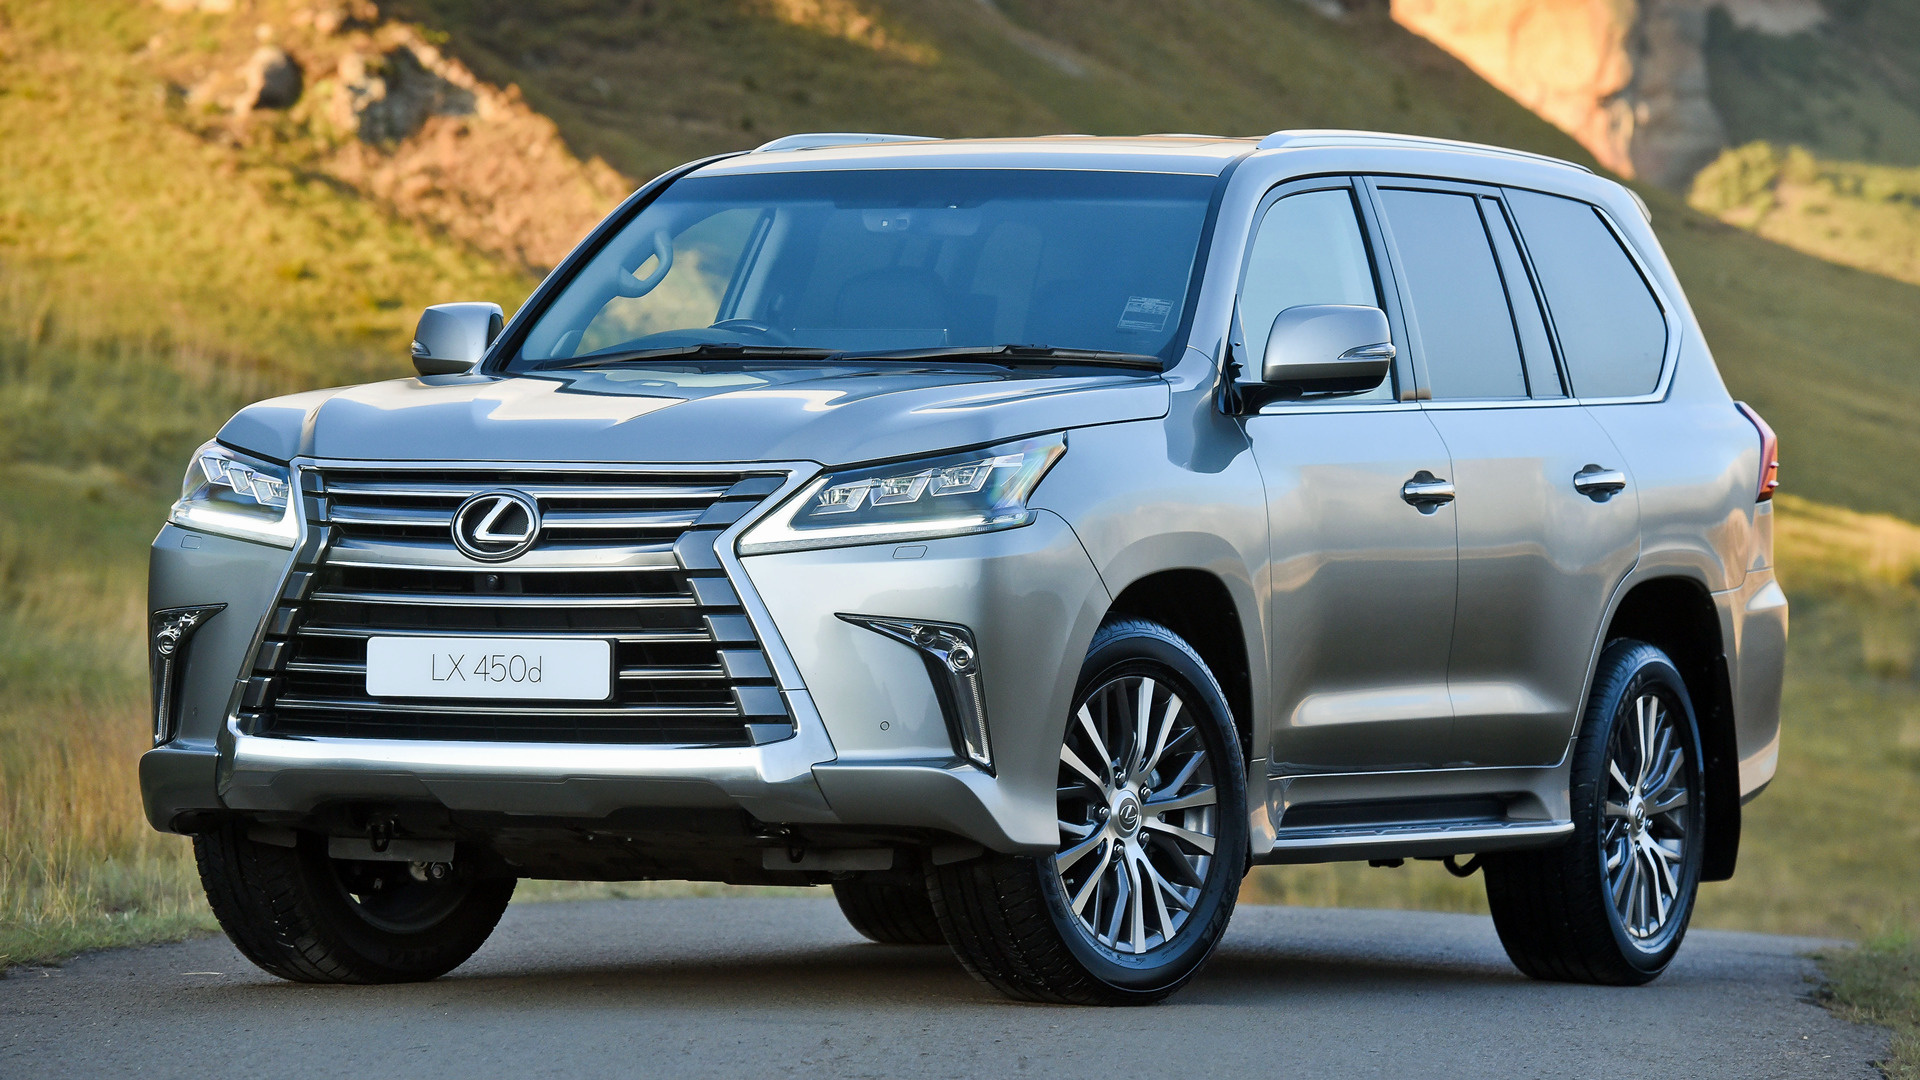 2016 Lexus LX (ZA) - Wallpapers and HD Images | Car Pixel